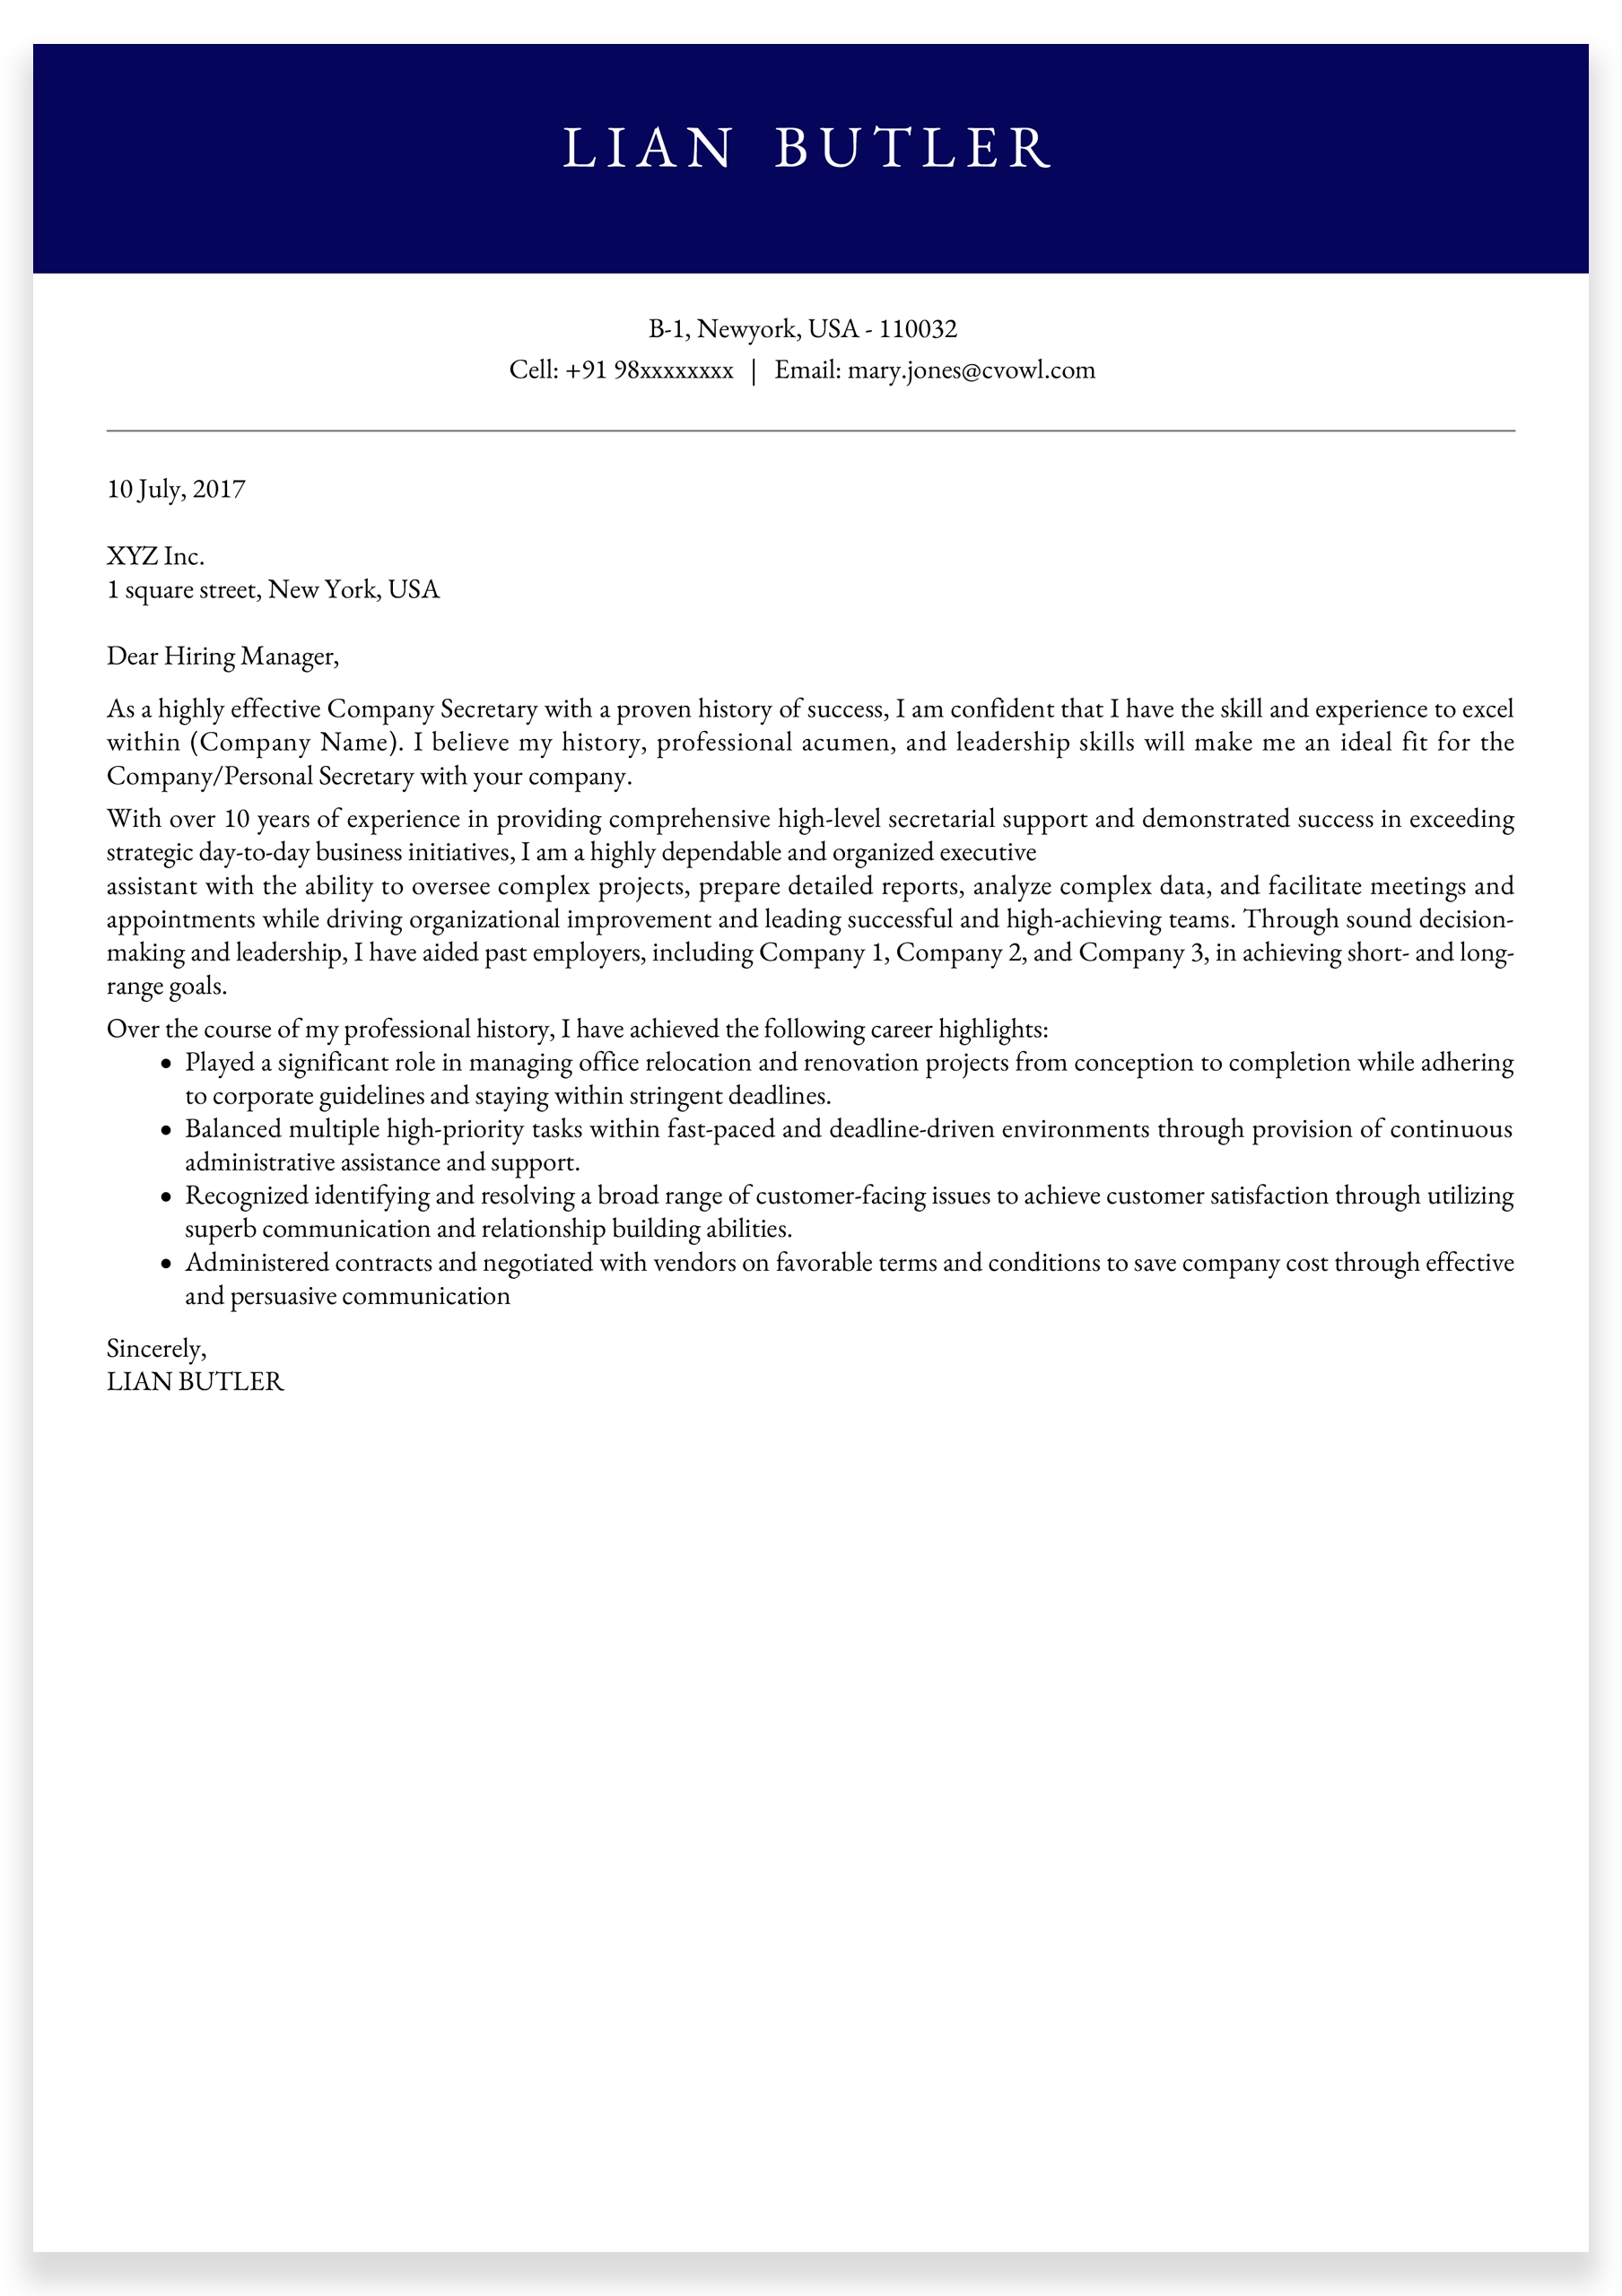 Marketing-Executive-Cover-Letter-sample8